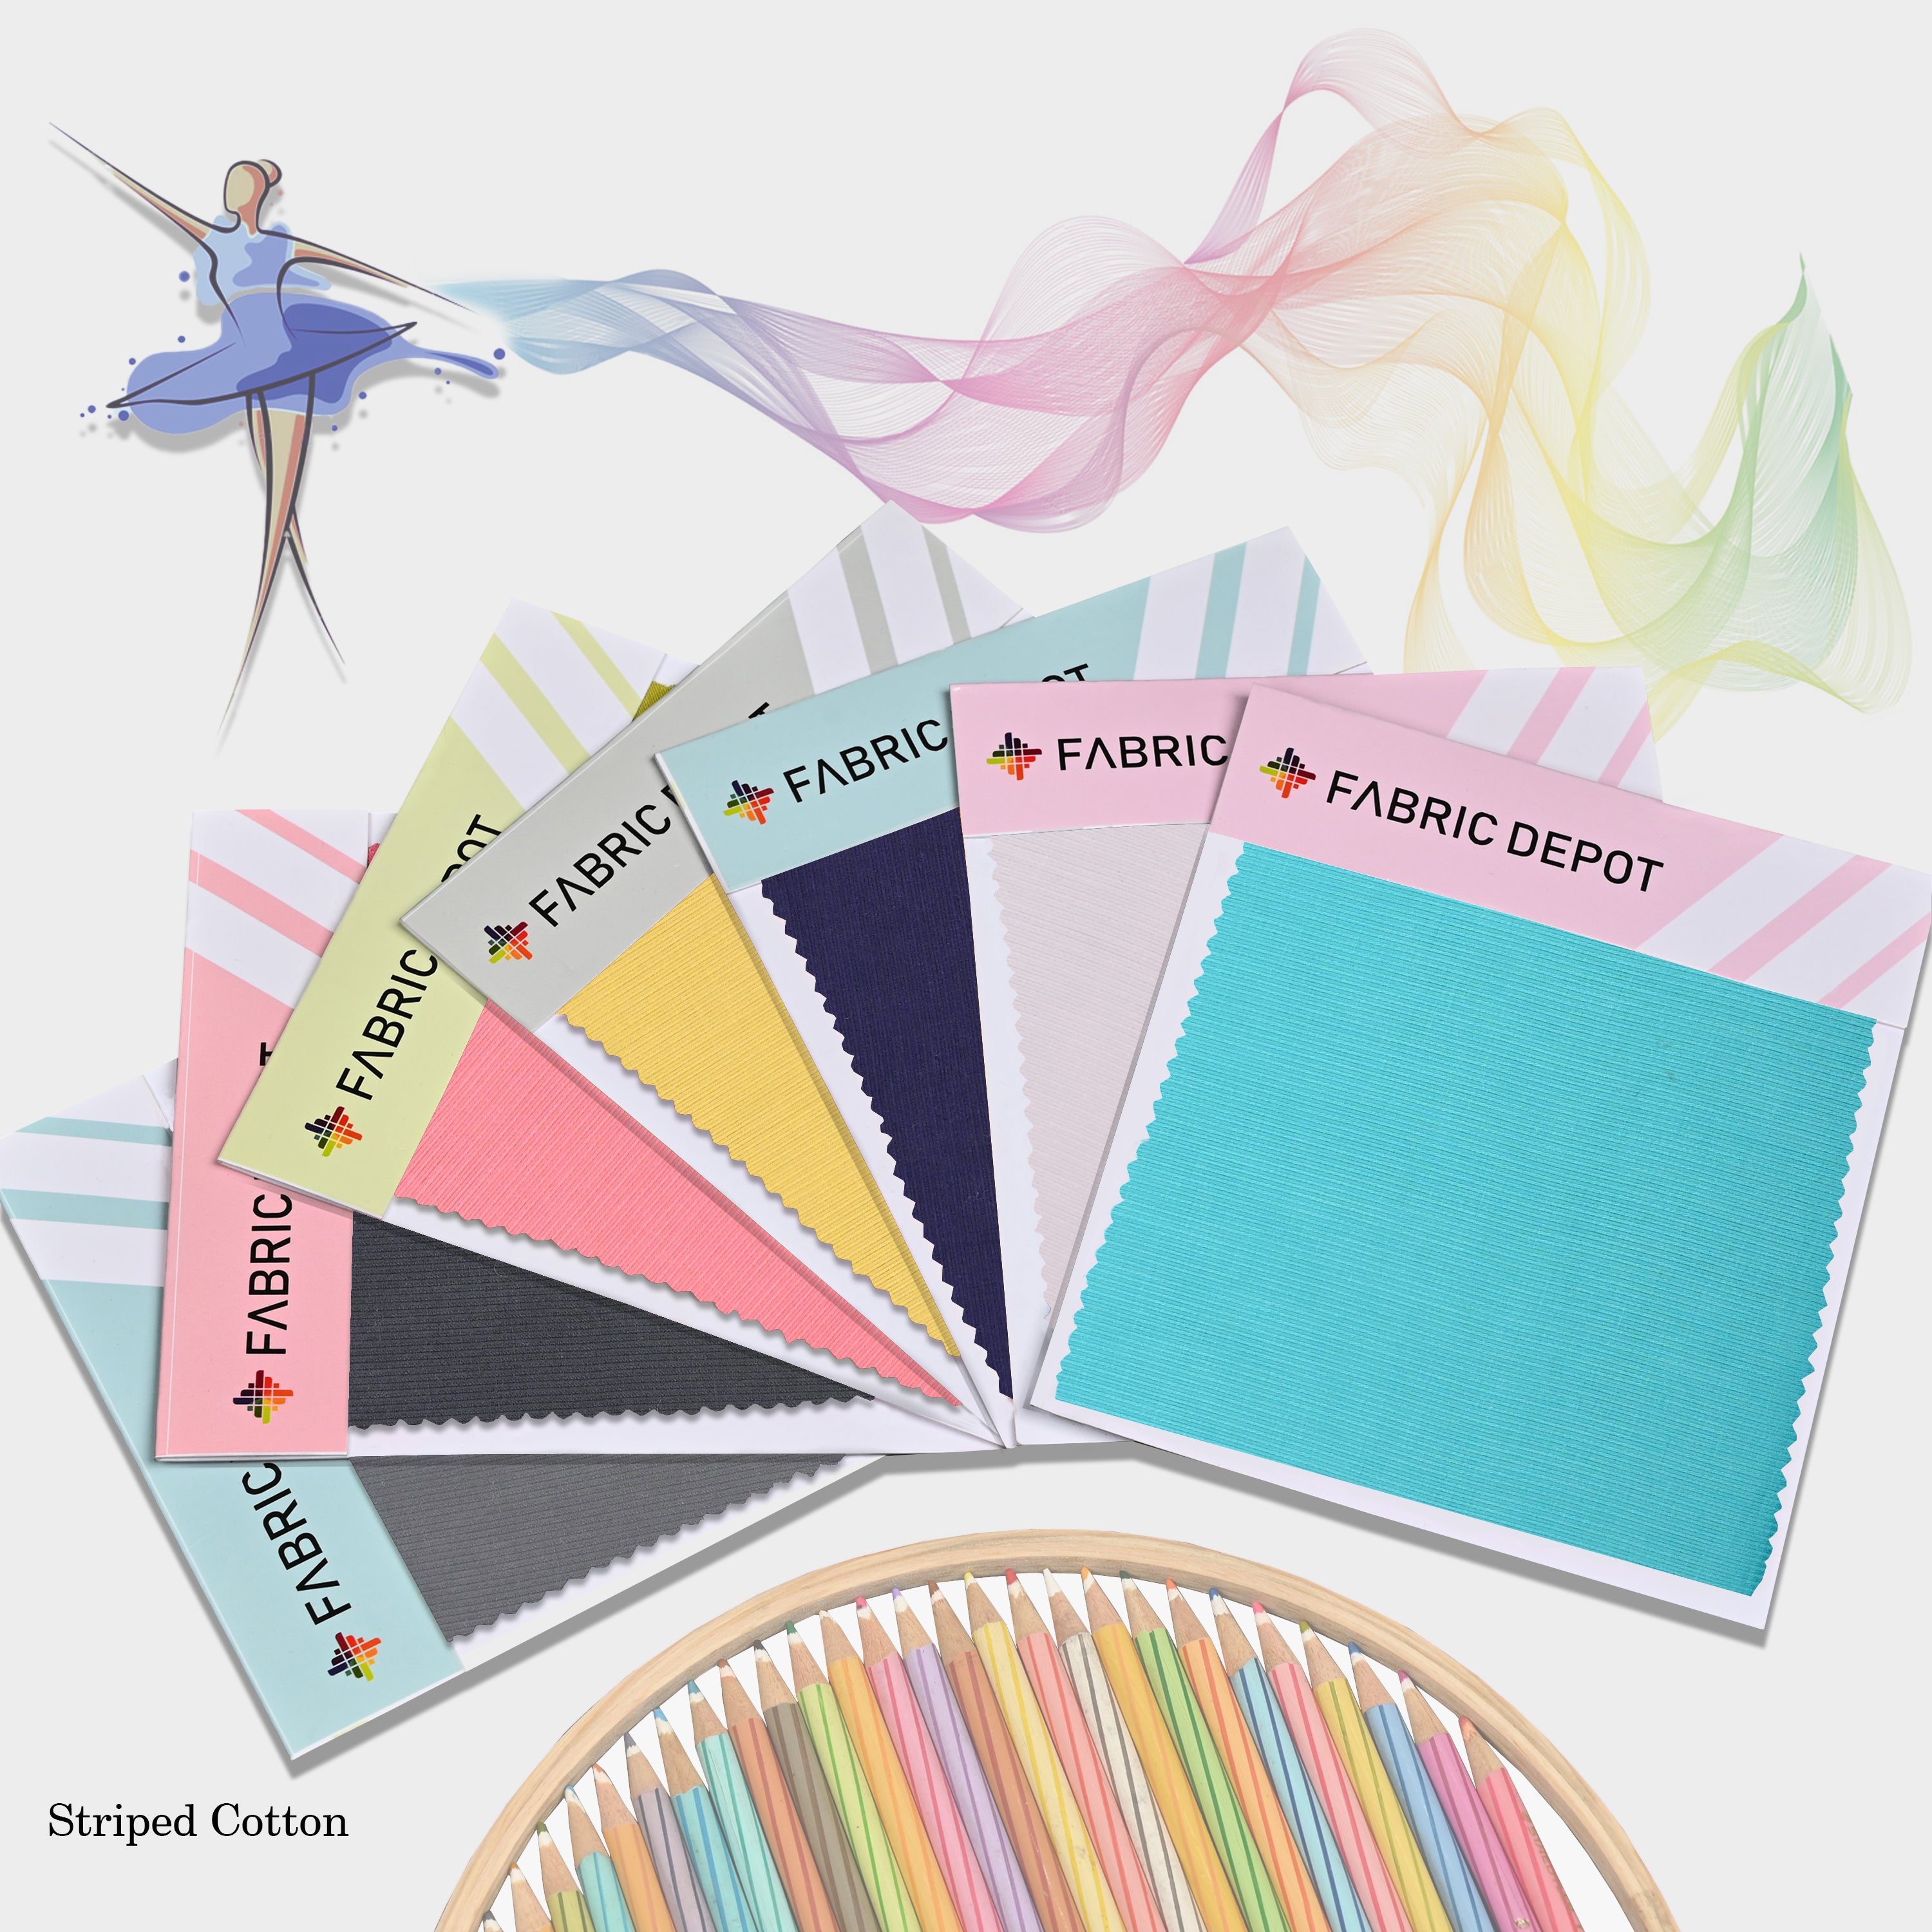 Striped Cotton-Swatch Card